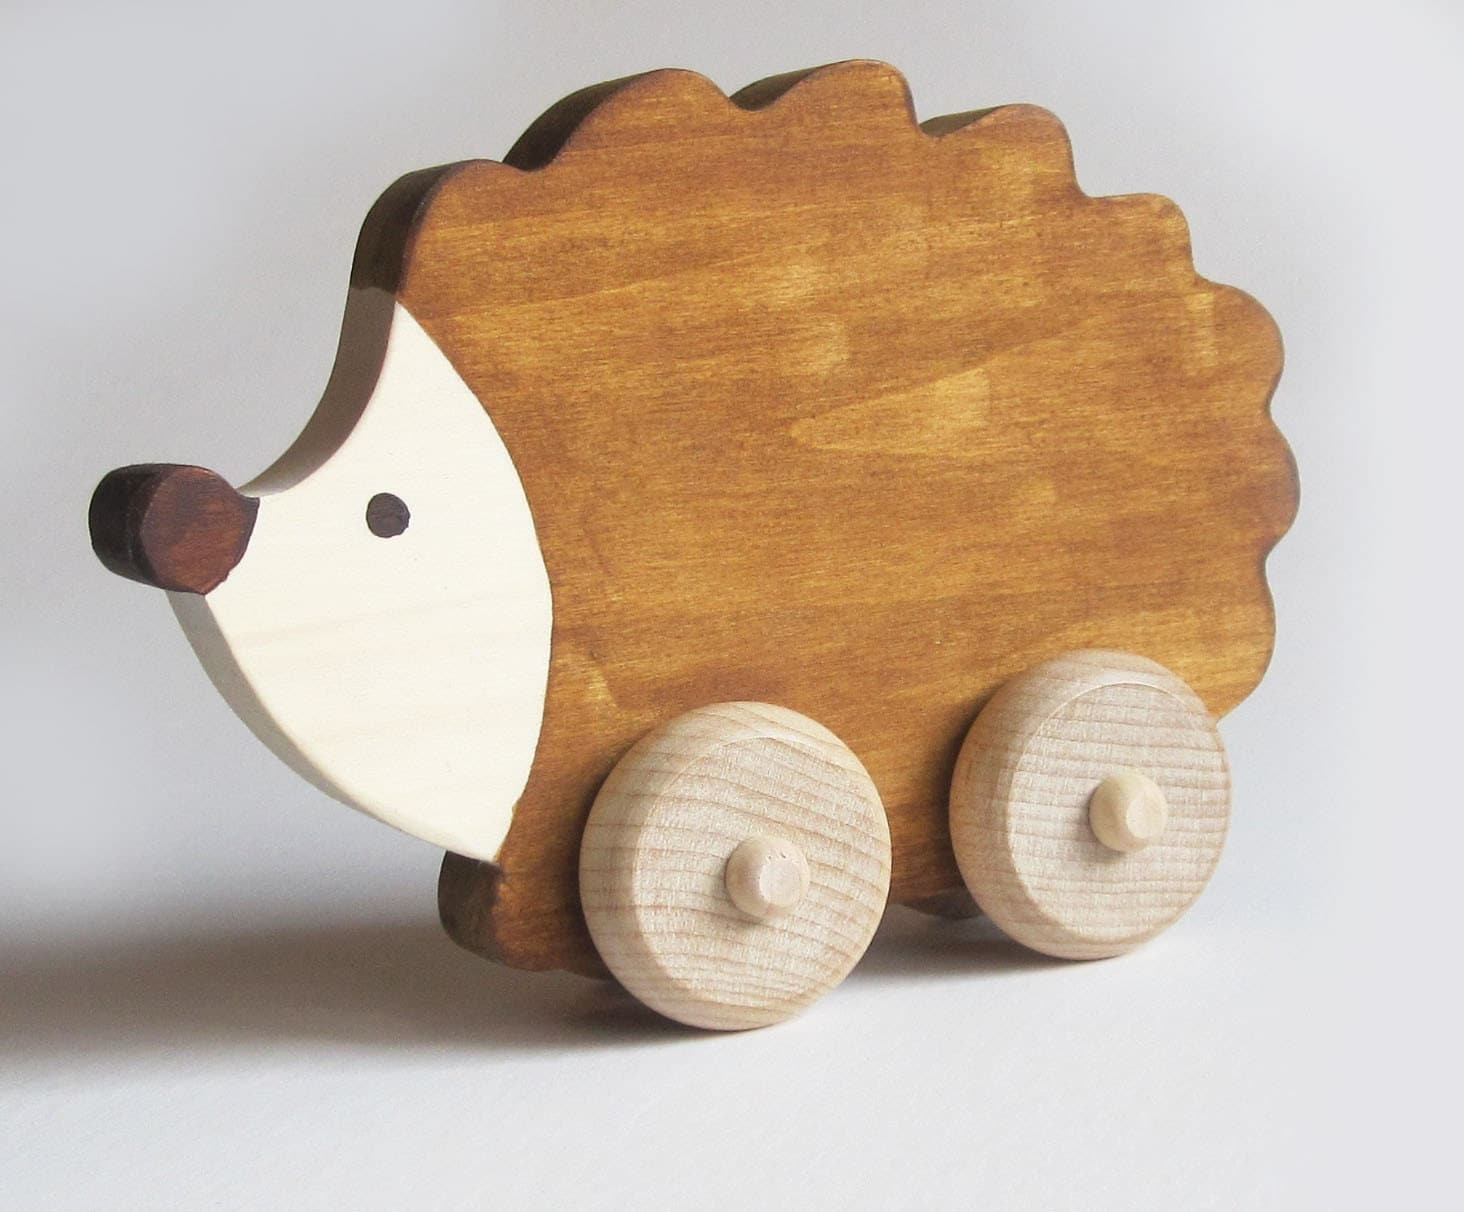 Wooden toy Hedgehog Push Toy Waldorf by Imaginationkids on Etsy